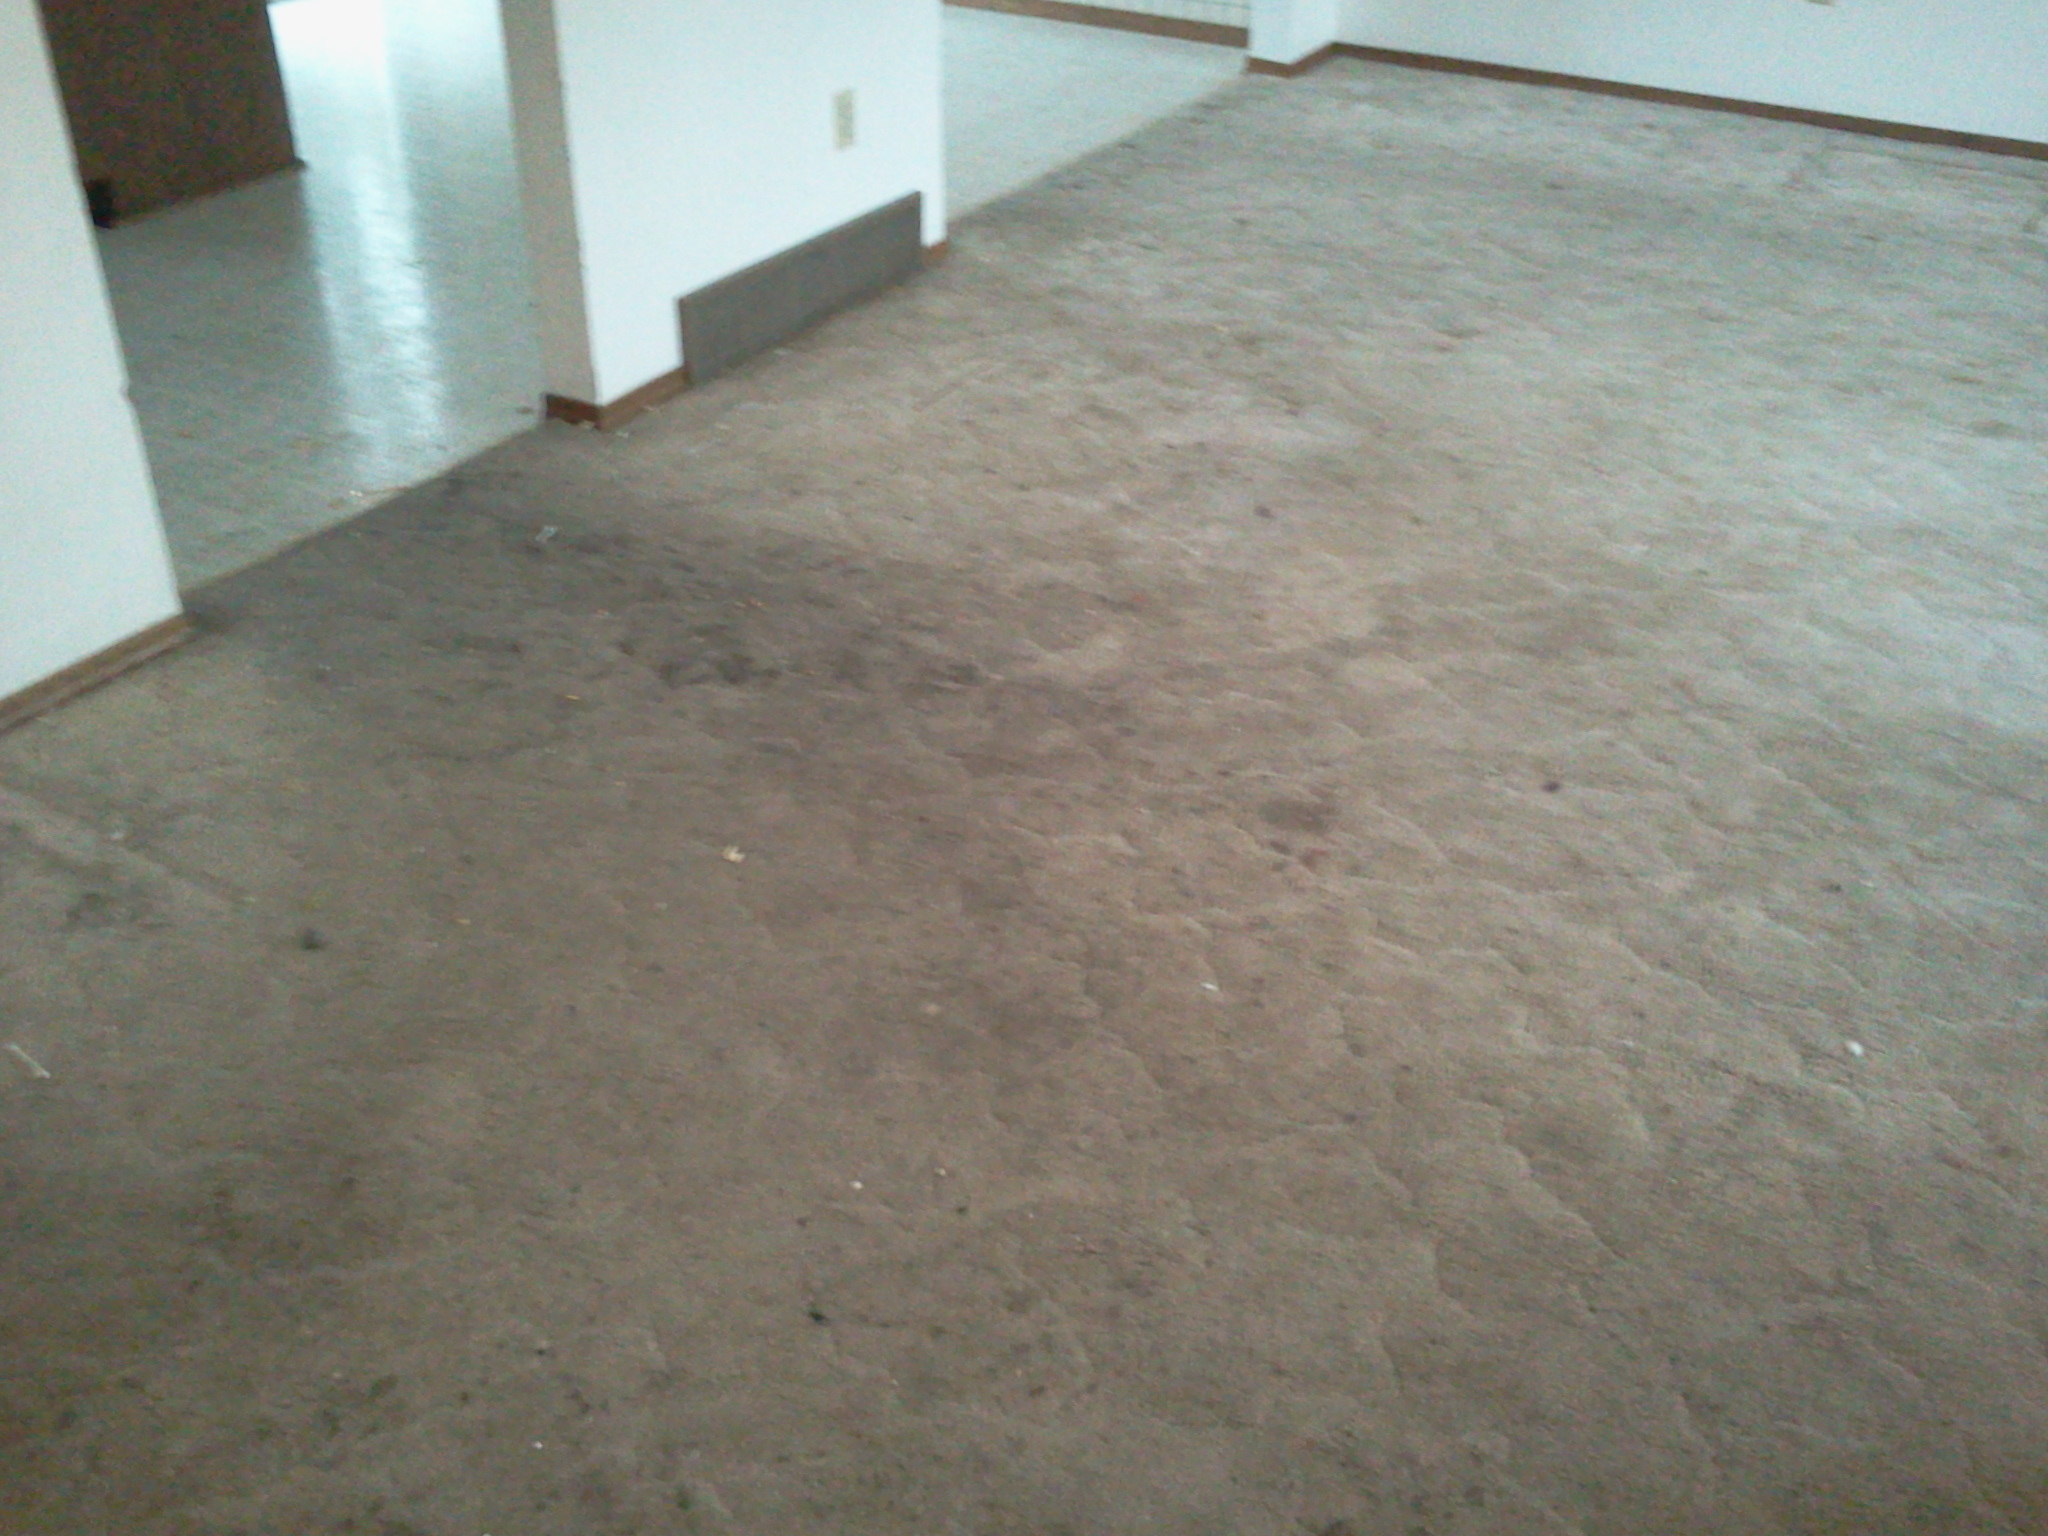 Sioux Falls Carpet Cleaning Upholstery Cleaning Sioux Falls, SD